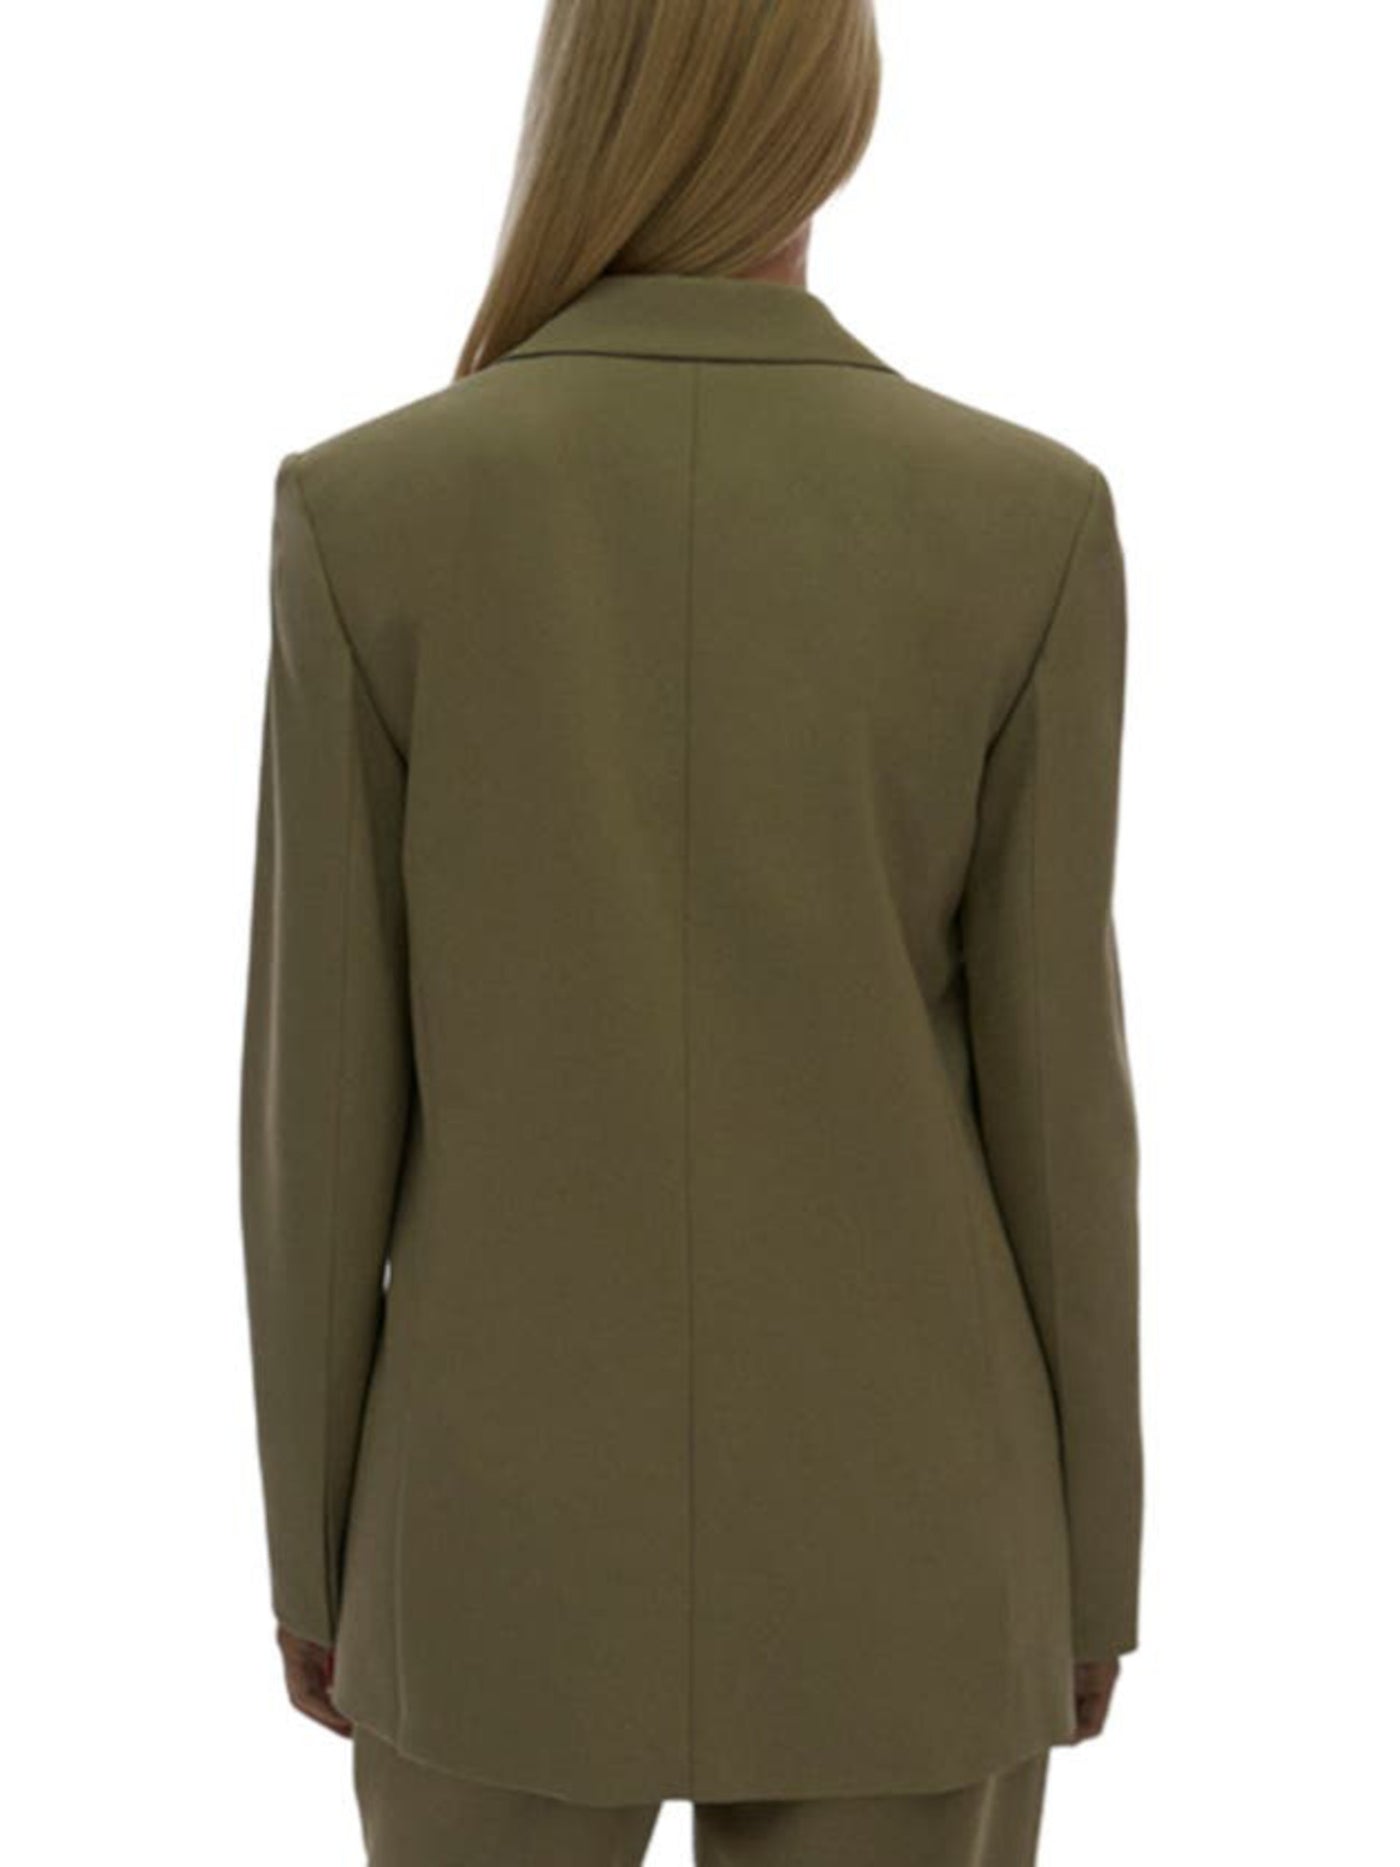 HELMUT LANG Womens Green Pocketed Open Front Notched Lapel Lined Vented Cuffs Wear To Work Blazer Jacket 6